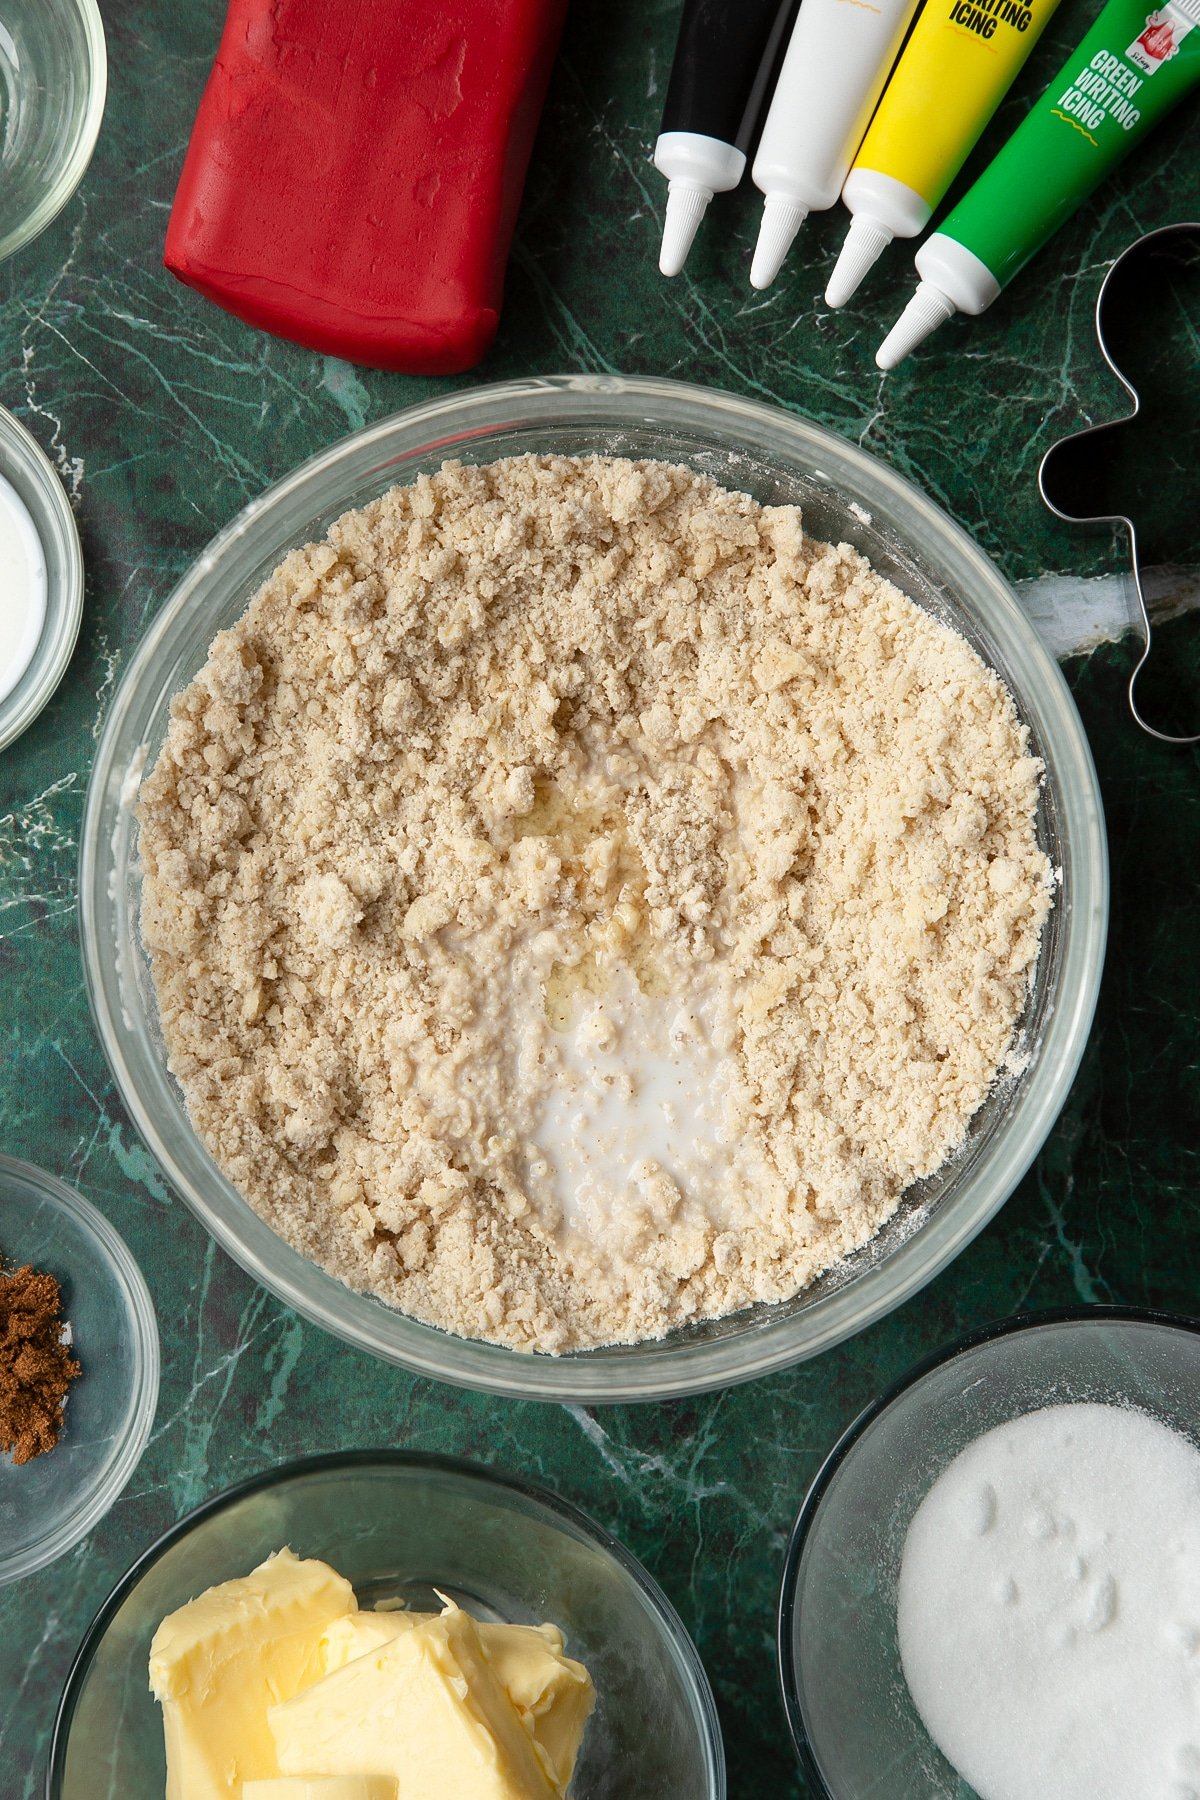 Flour, sugar, mixed spice rubbed together in a glass mixing bowl with milk & lemon extract on top. The bowl is surrounded by ingredients to make Father Christmas cookies.